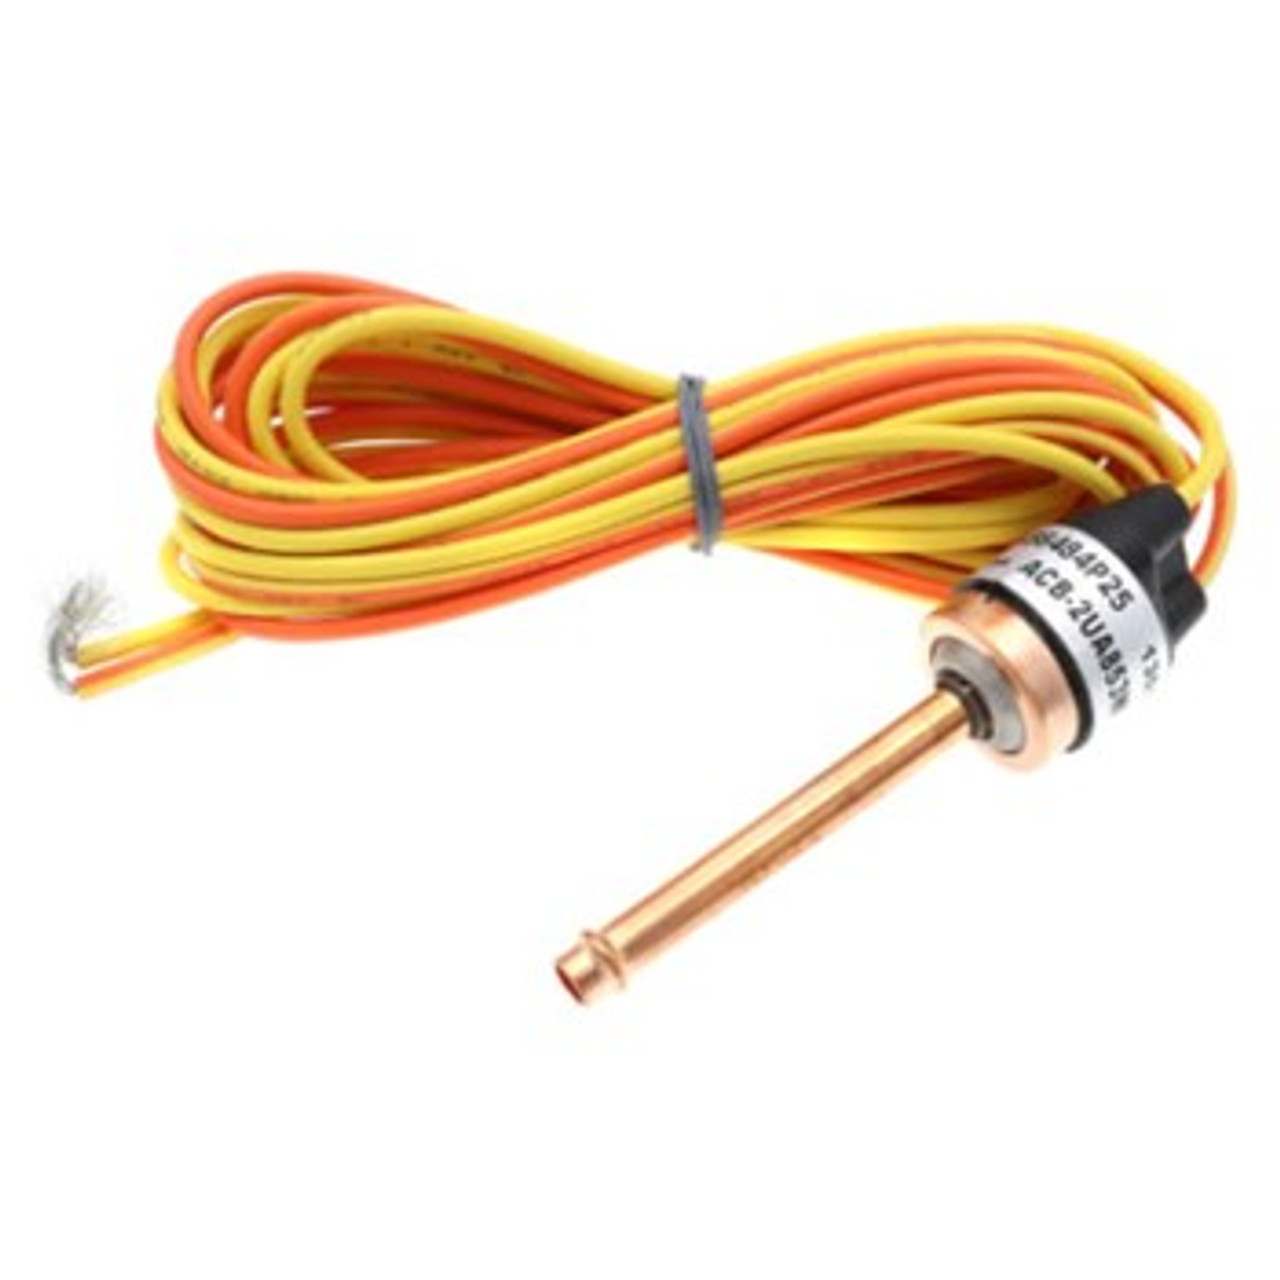 SWT03374 - Low Pressure Switch